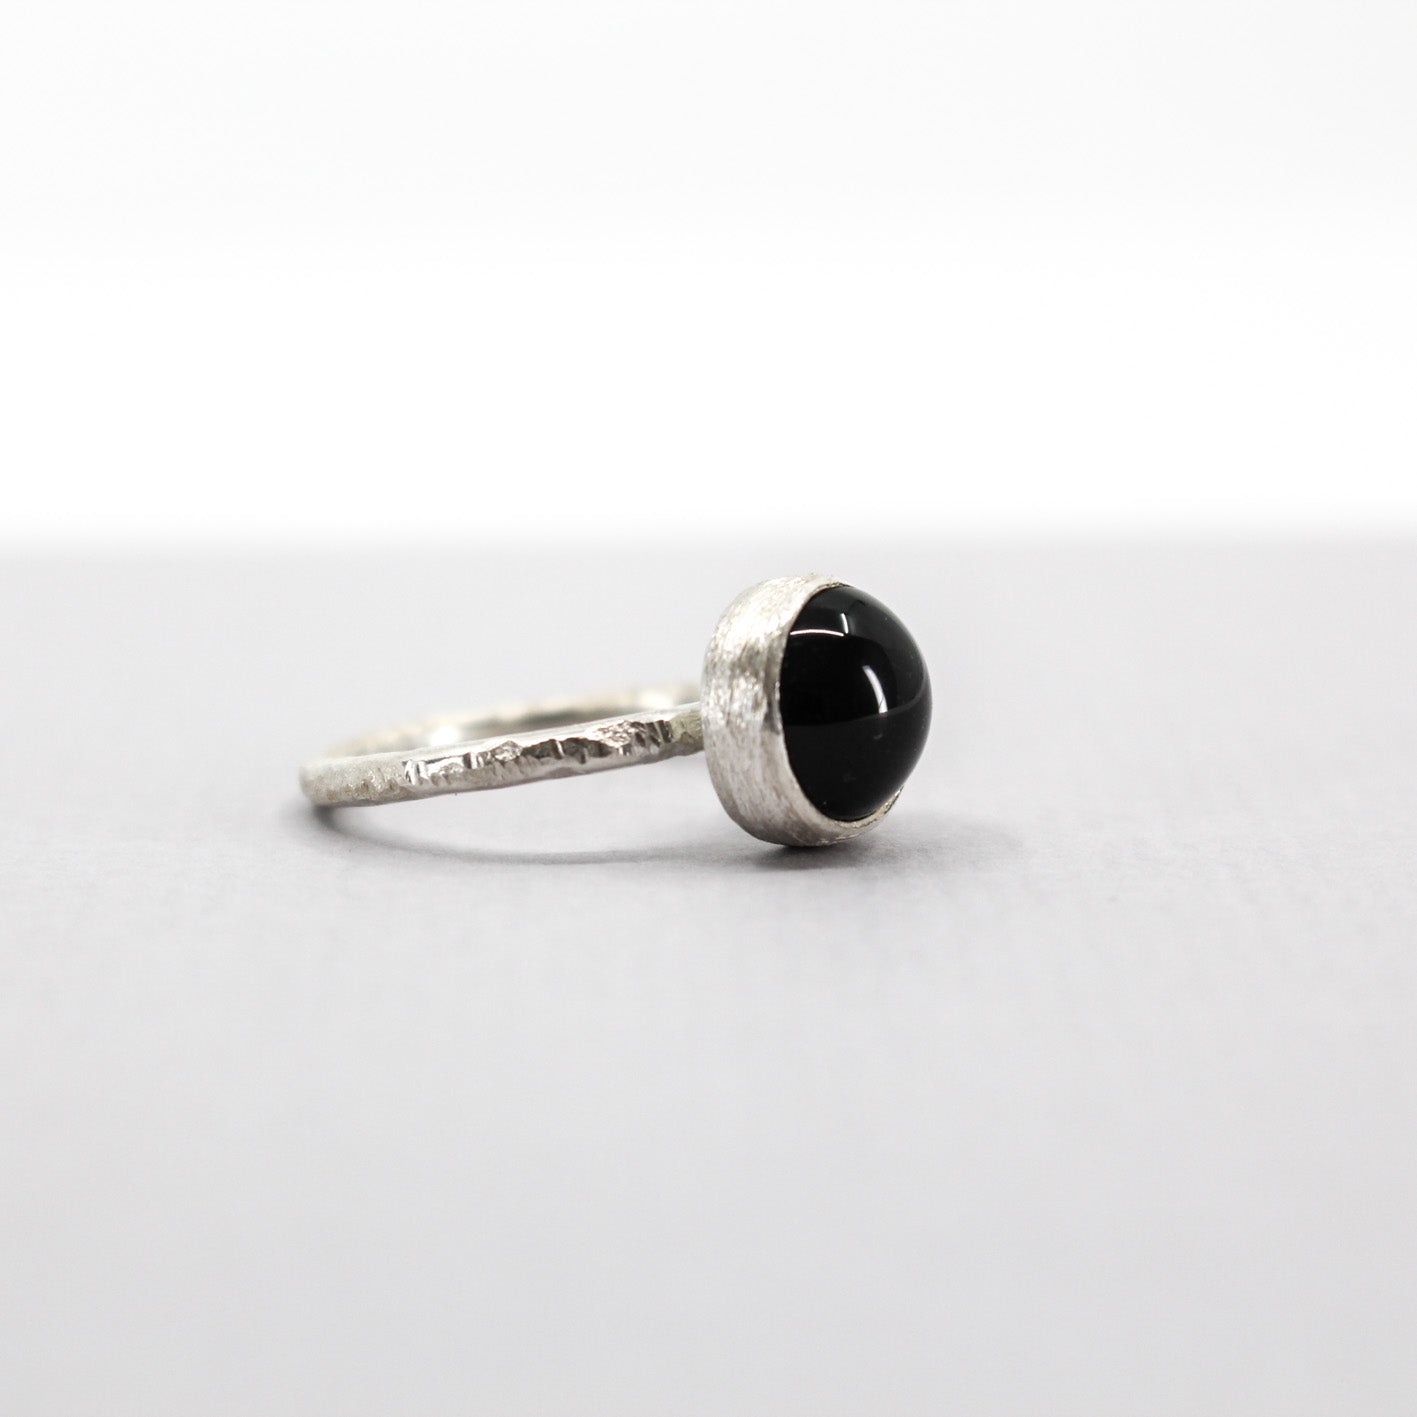 black onyx silver ring with textured round 925 eco sterling silver band • 10 mm onyx